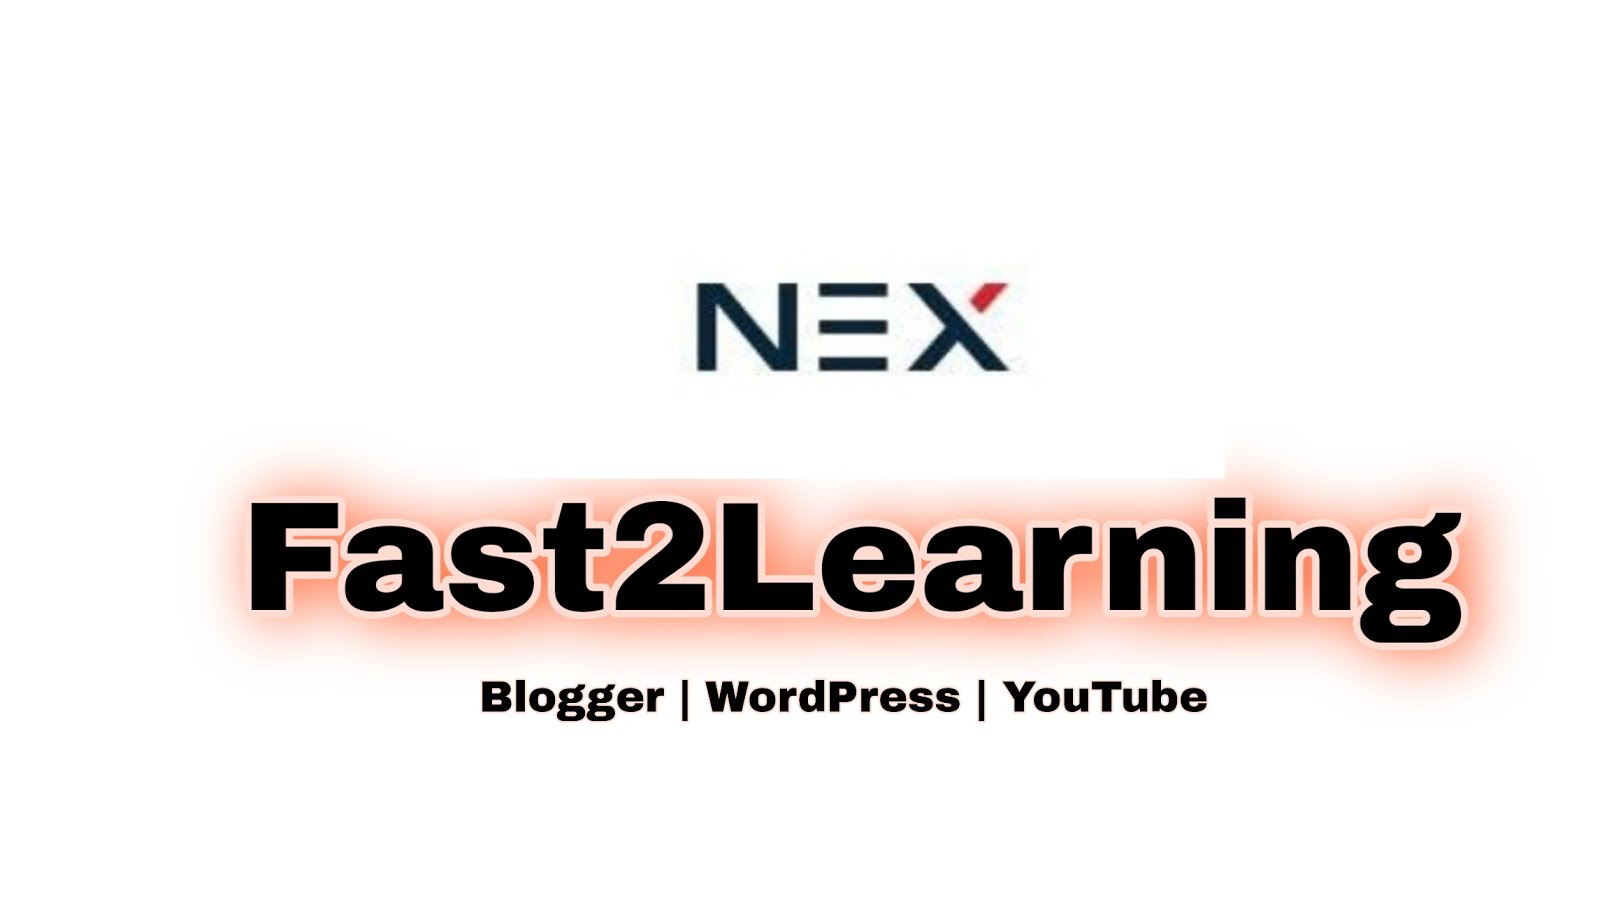 Fast 2 Learning